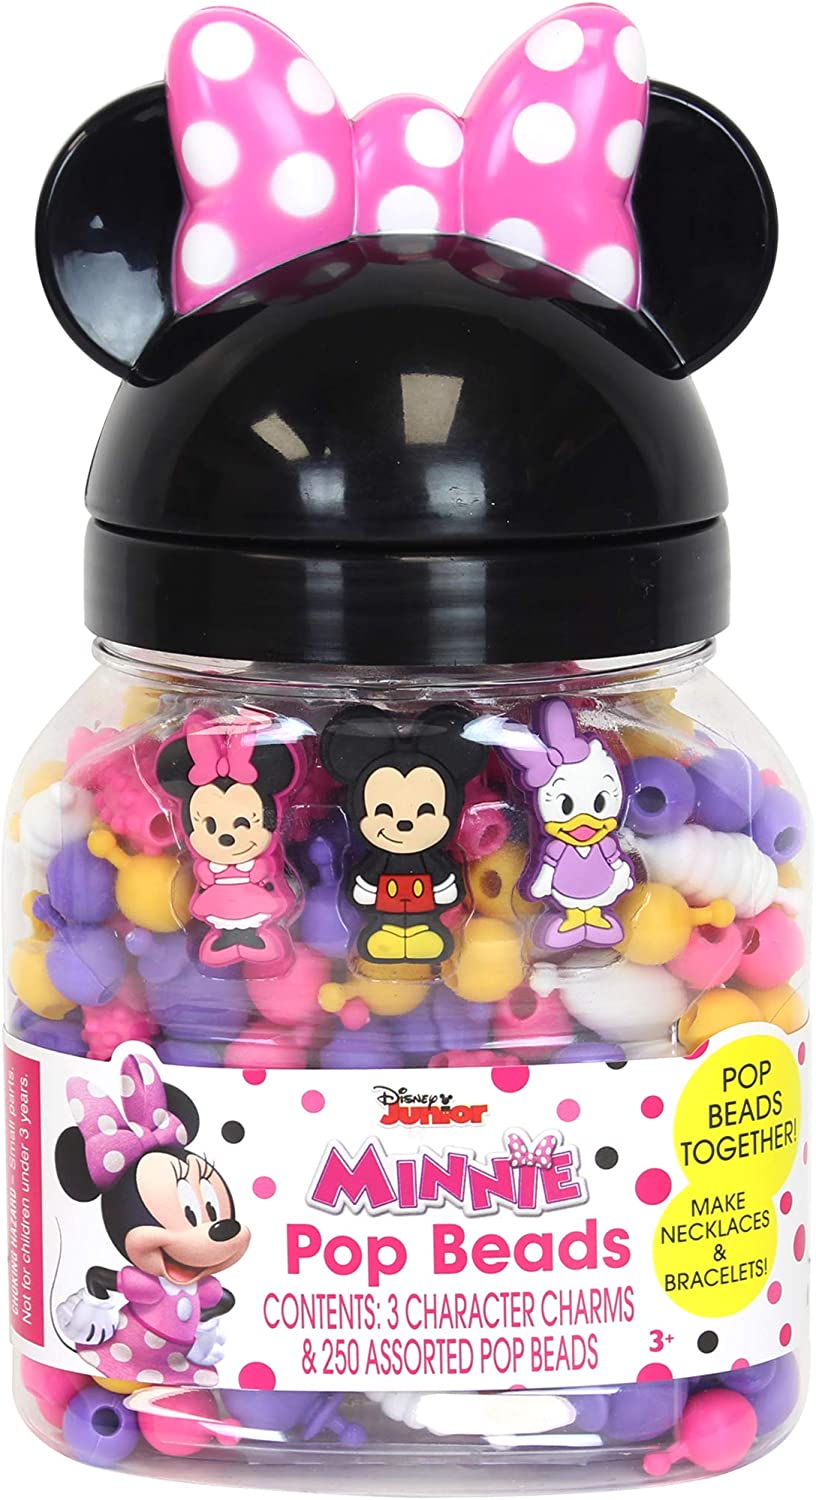 MINNIE MOUSE POP BEADS